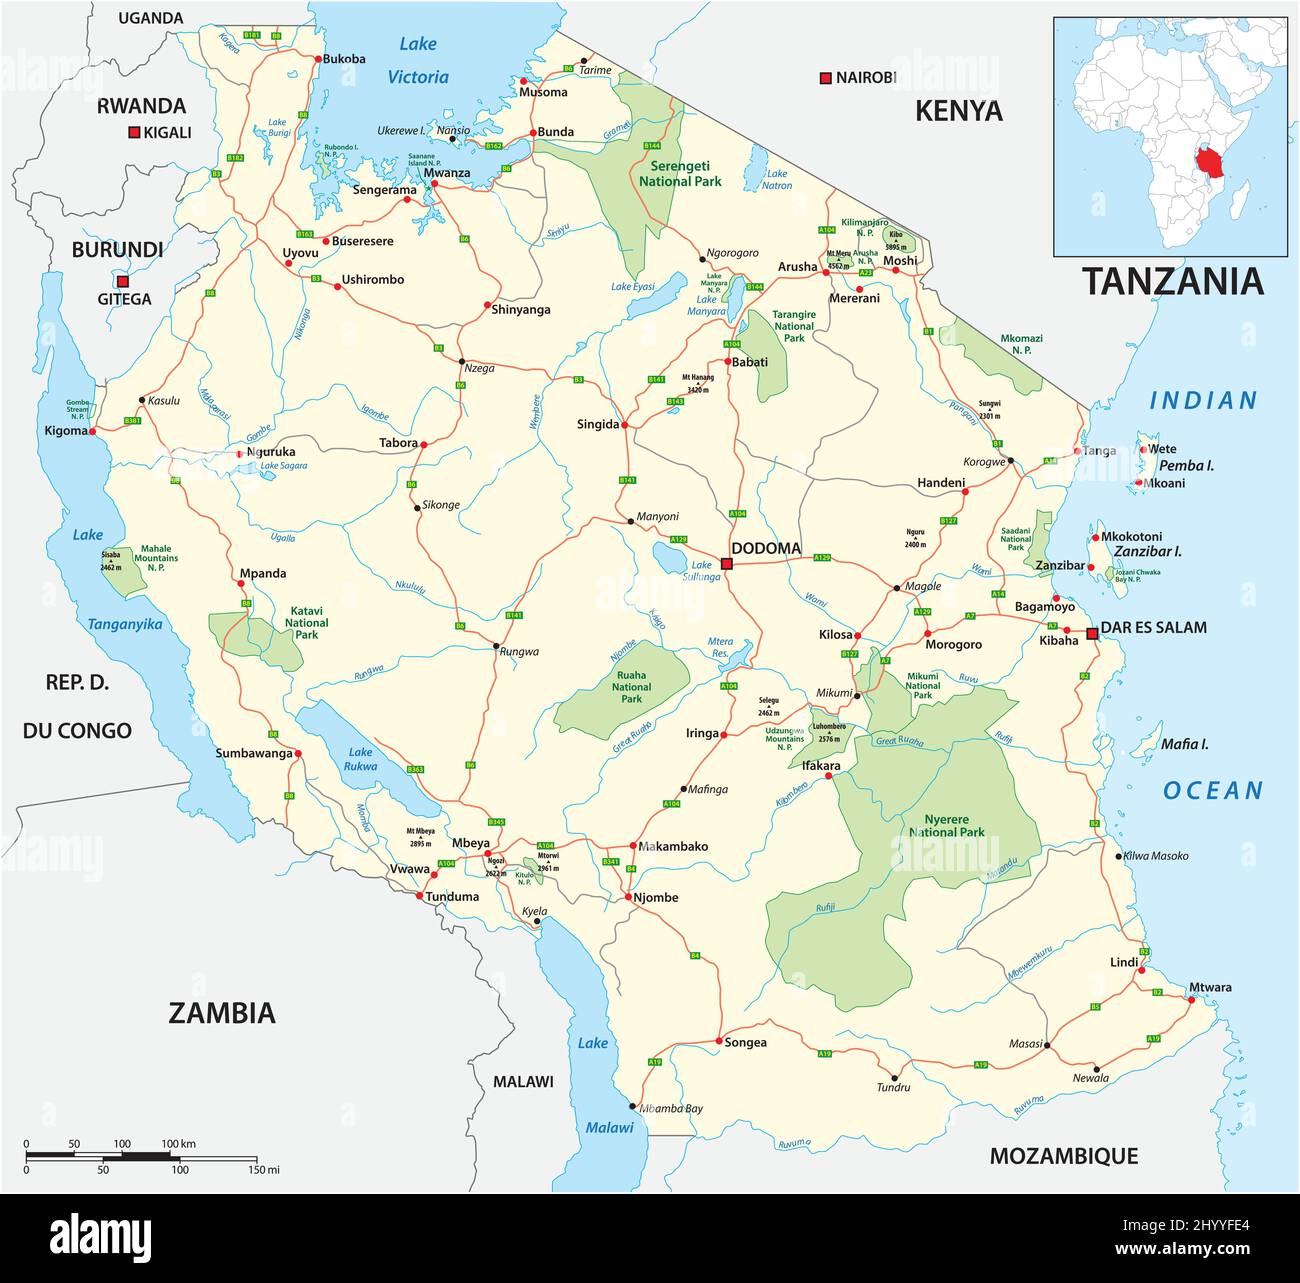 Roads and National Park Vector Map of Tanzania Stock Vector